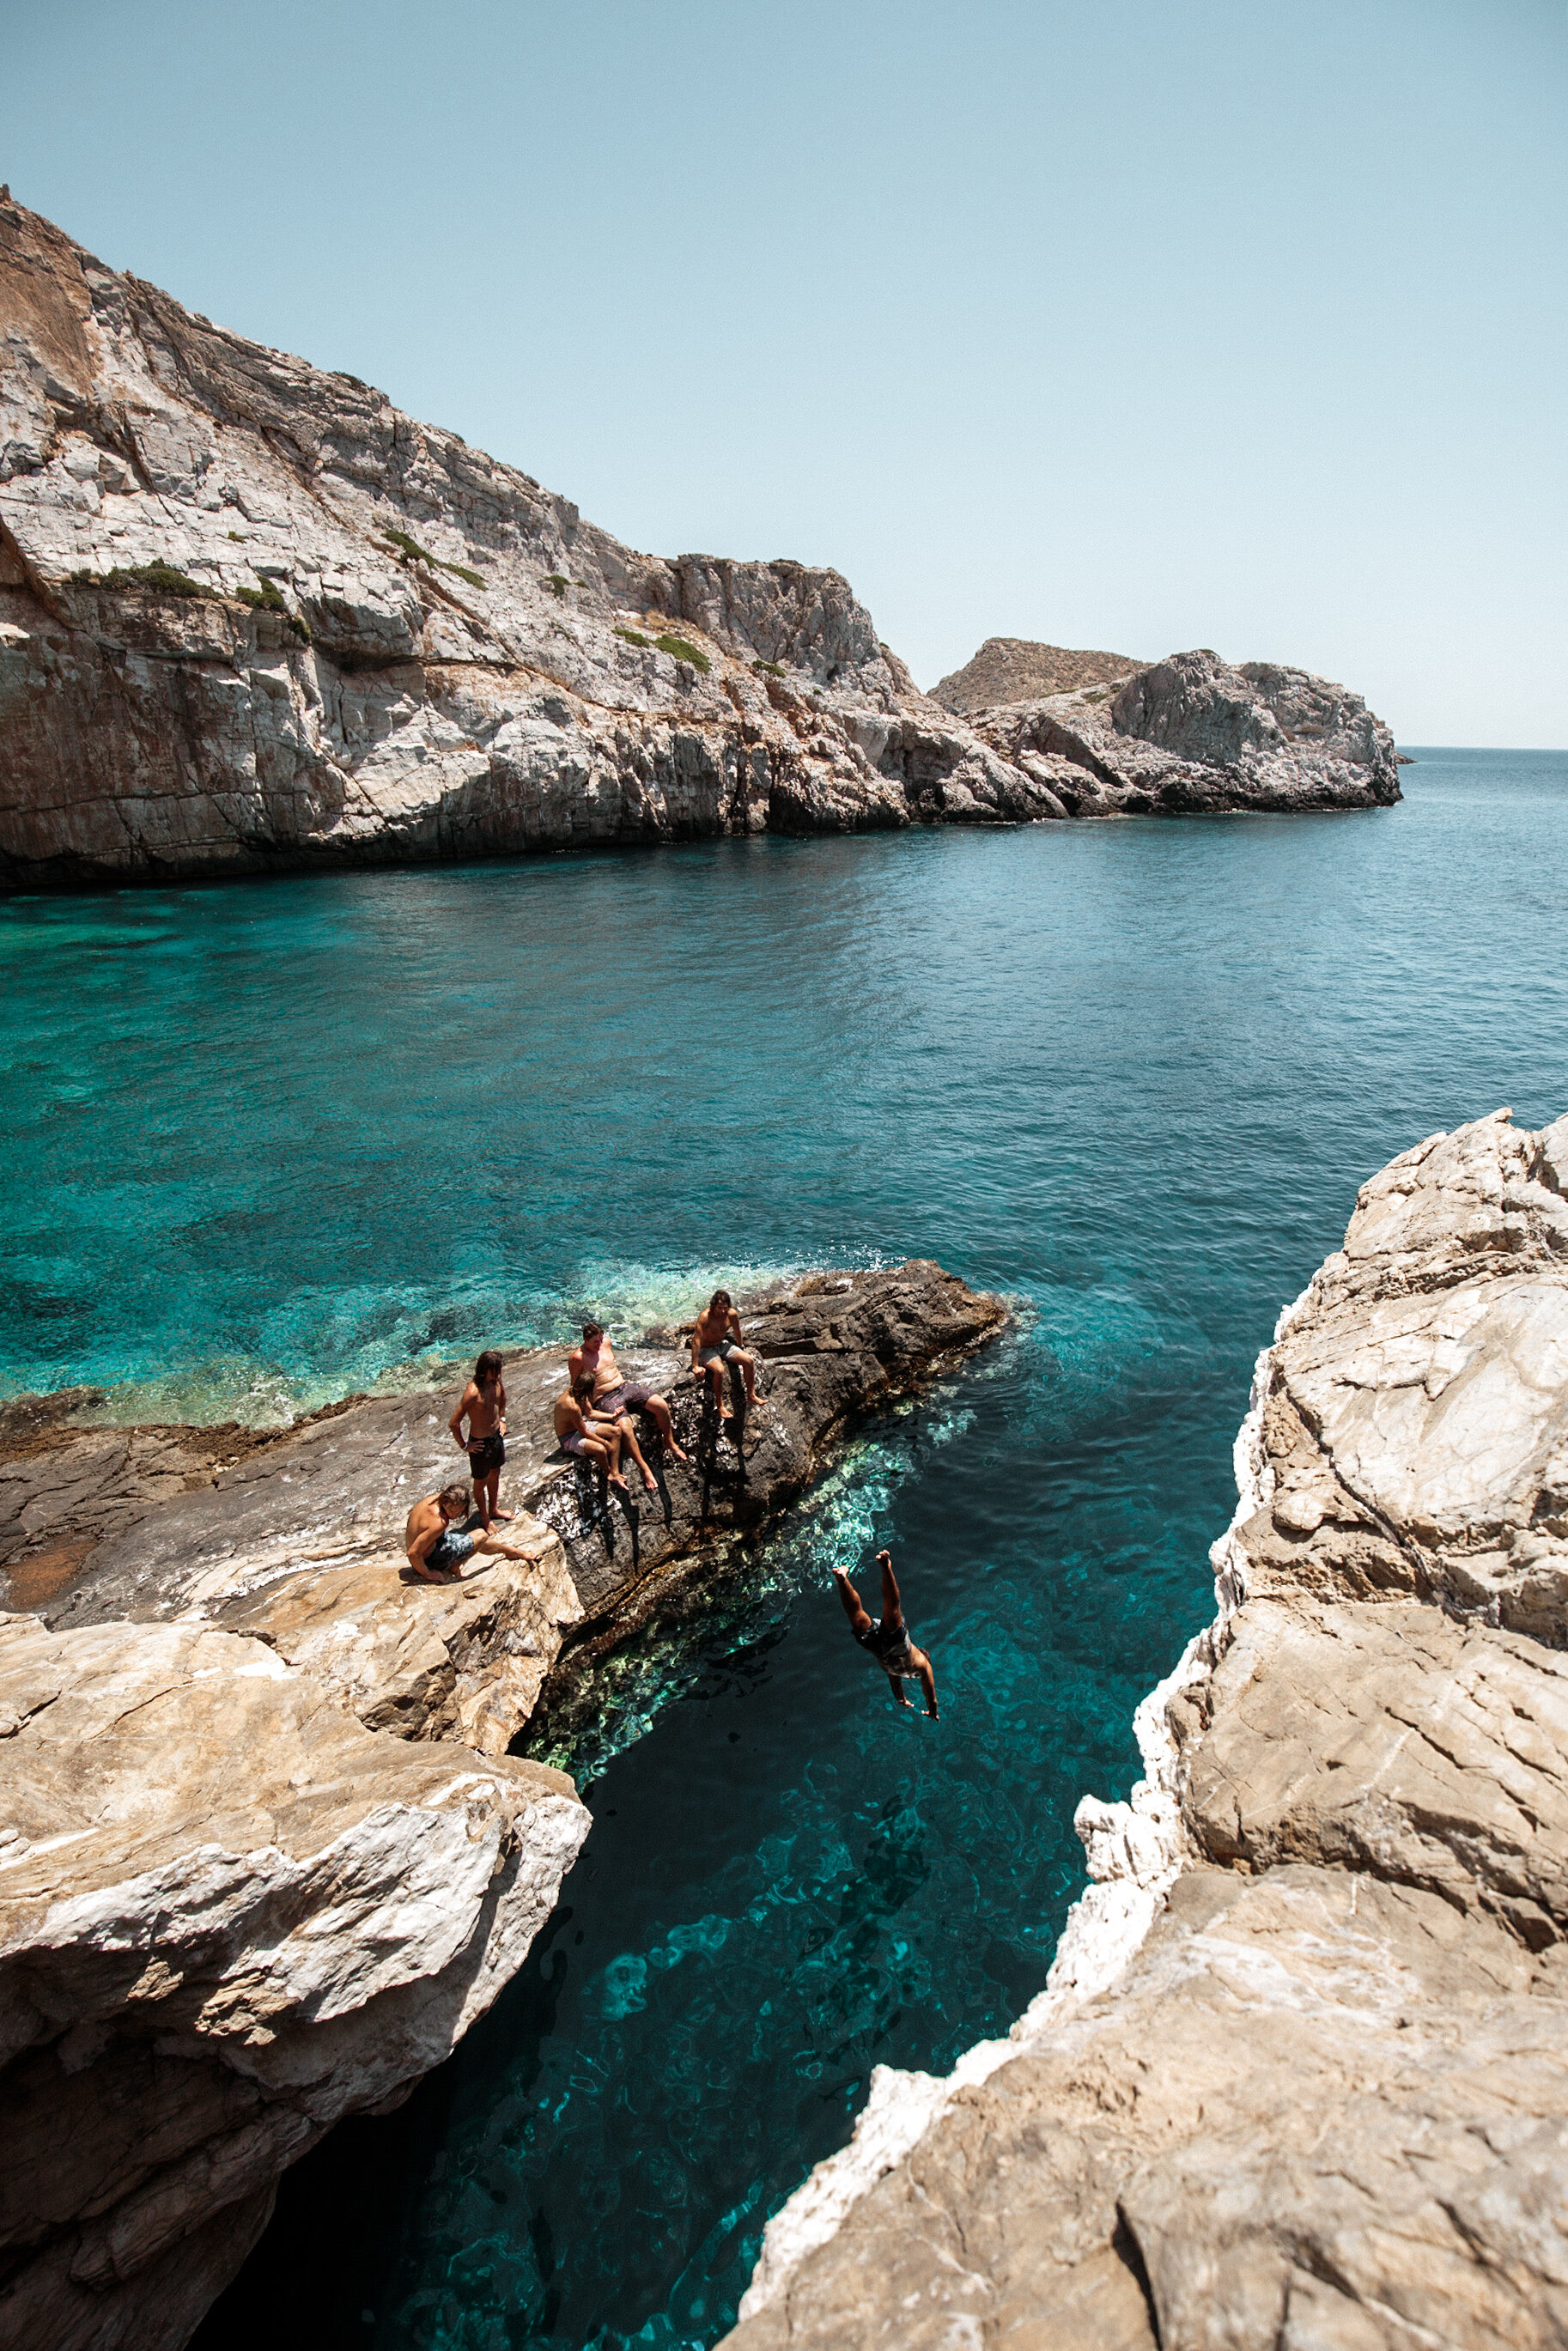  After spending summer in Greece living on Ios, this Ios Greece photography guide will inspire you to book your own trip. Get tips on where to eat in Ios and the best photo spots in Ios Greece. | ios greece photography | ios greece things to do in | 